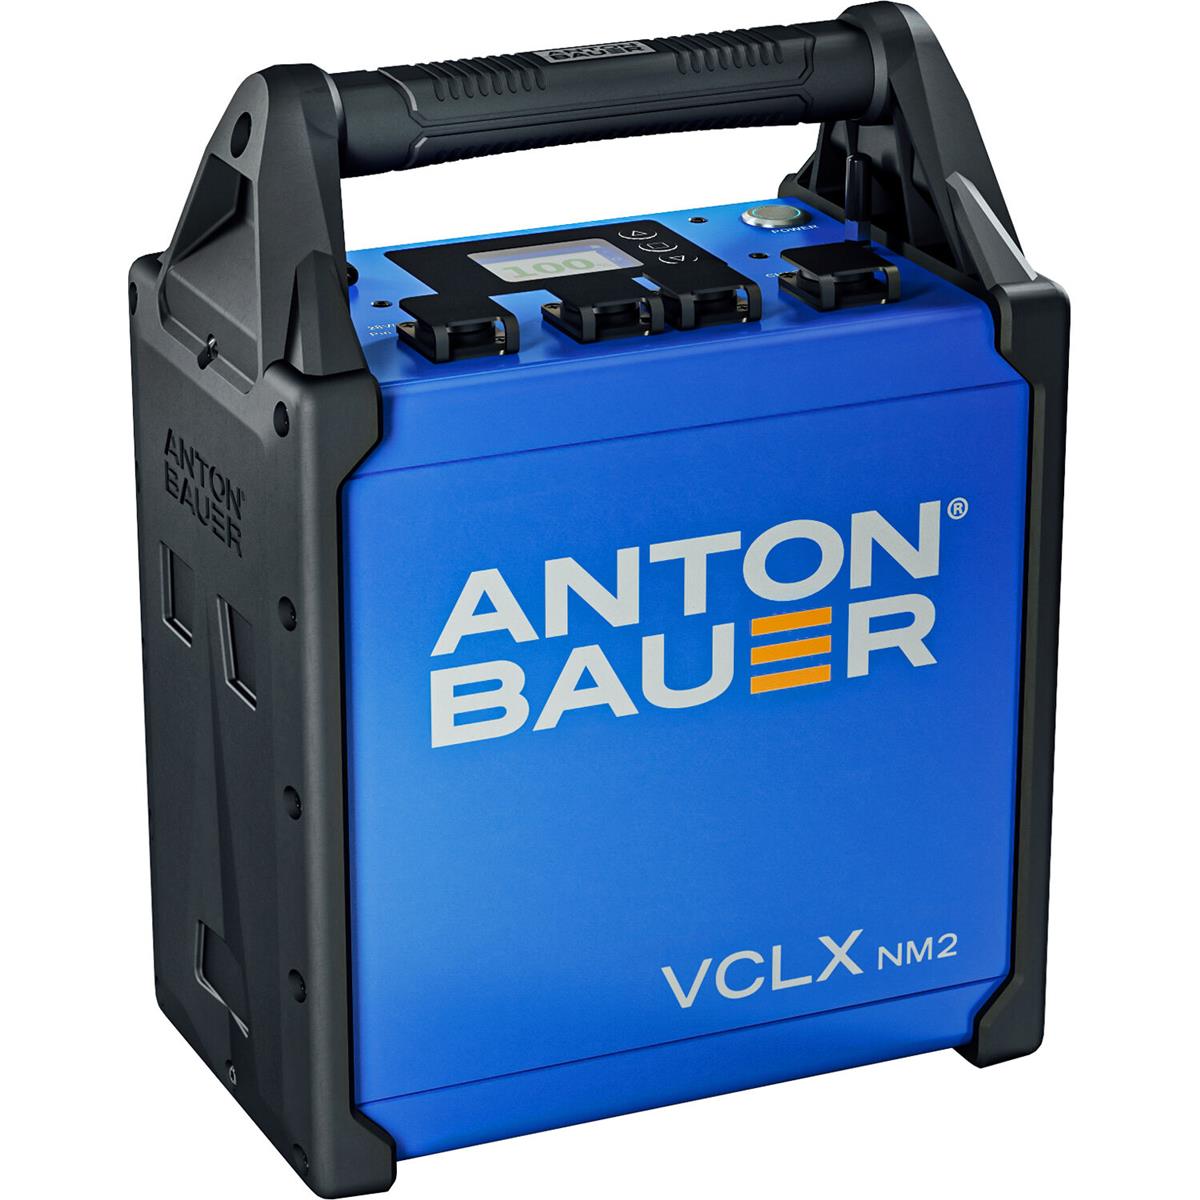 

Anton Bauer VCLX NM2 600Wh Dual Voltage Ni-MH Free-Standing Battery